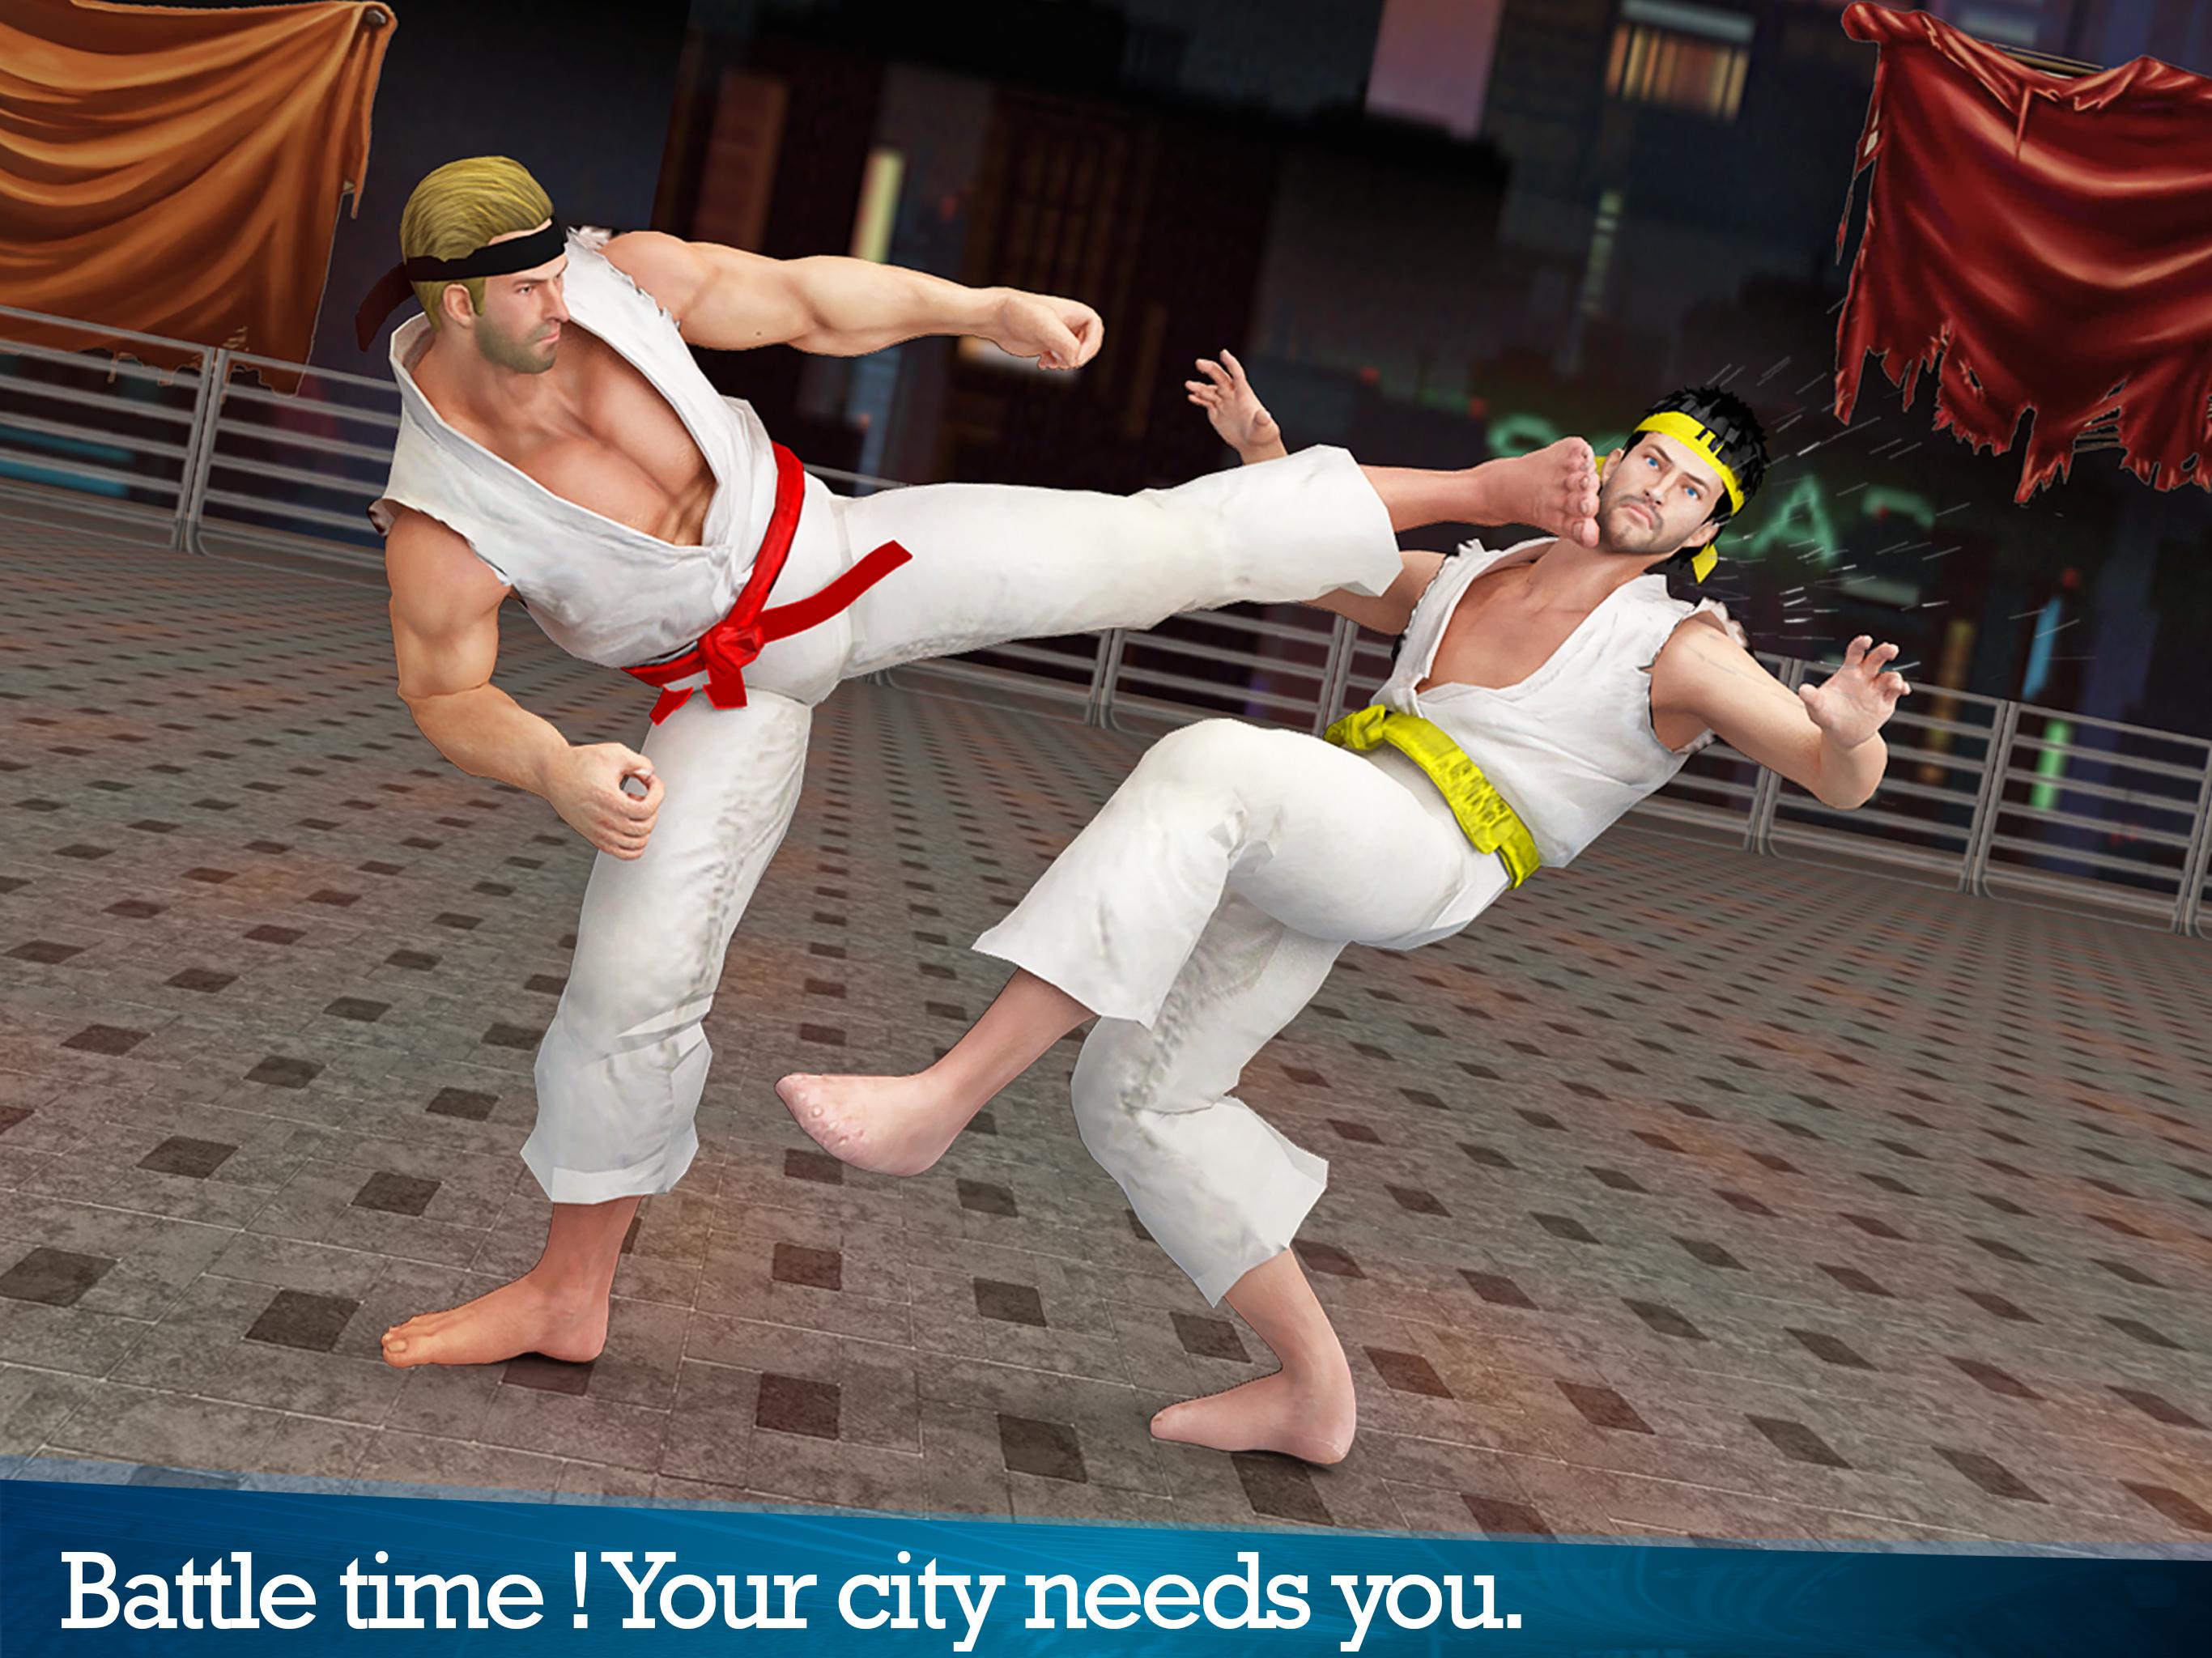 Karate Combattimento offline Giochi: reale Kung Fu for Android - APK  Download